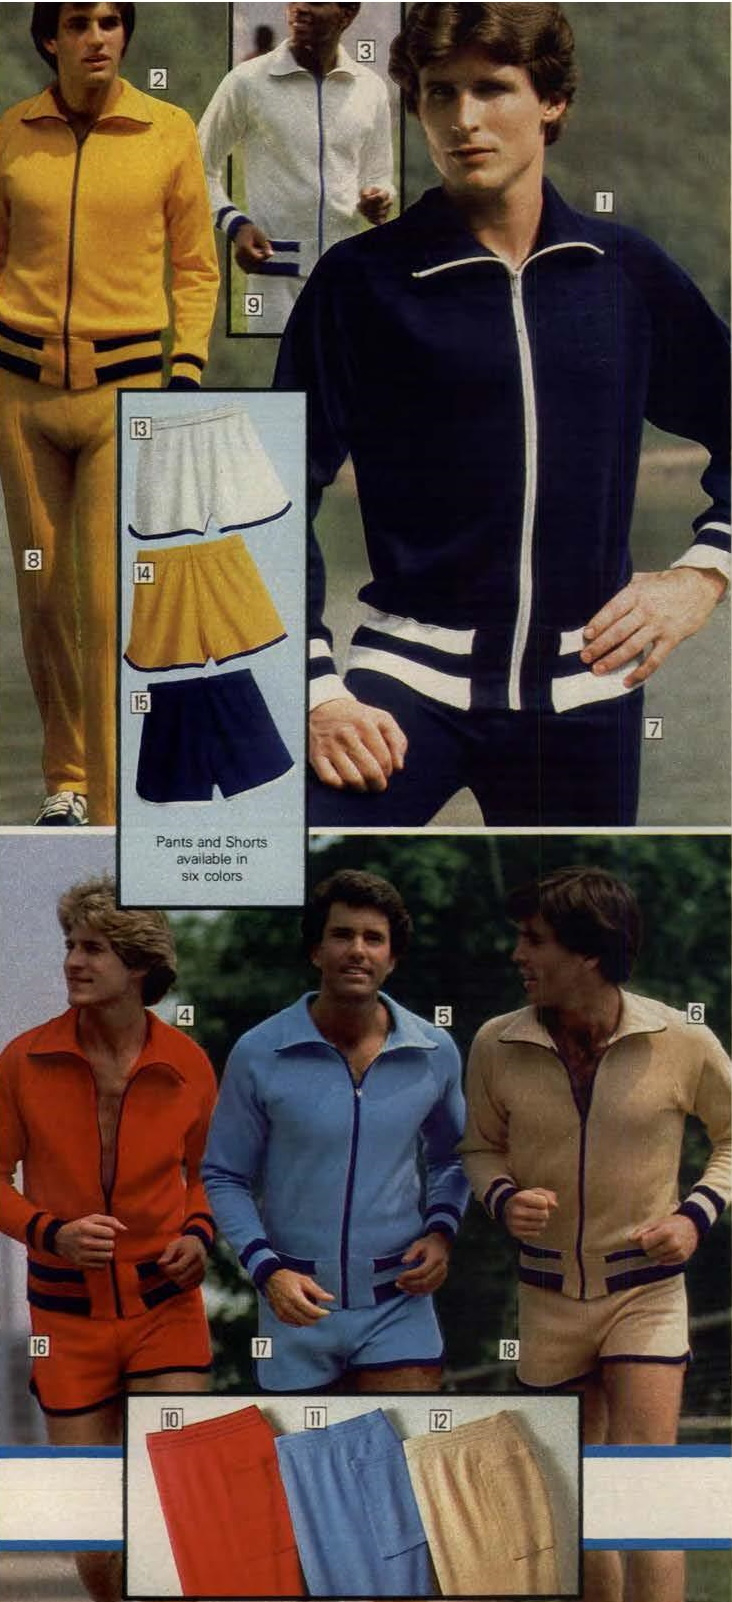 Gym Uniforms Of The 70s